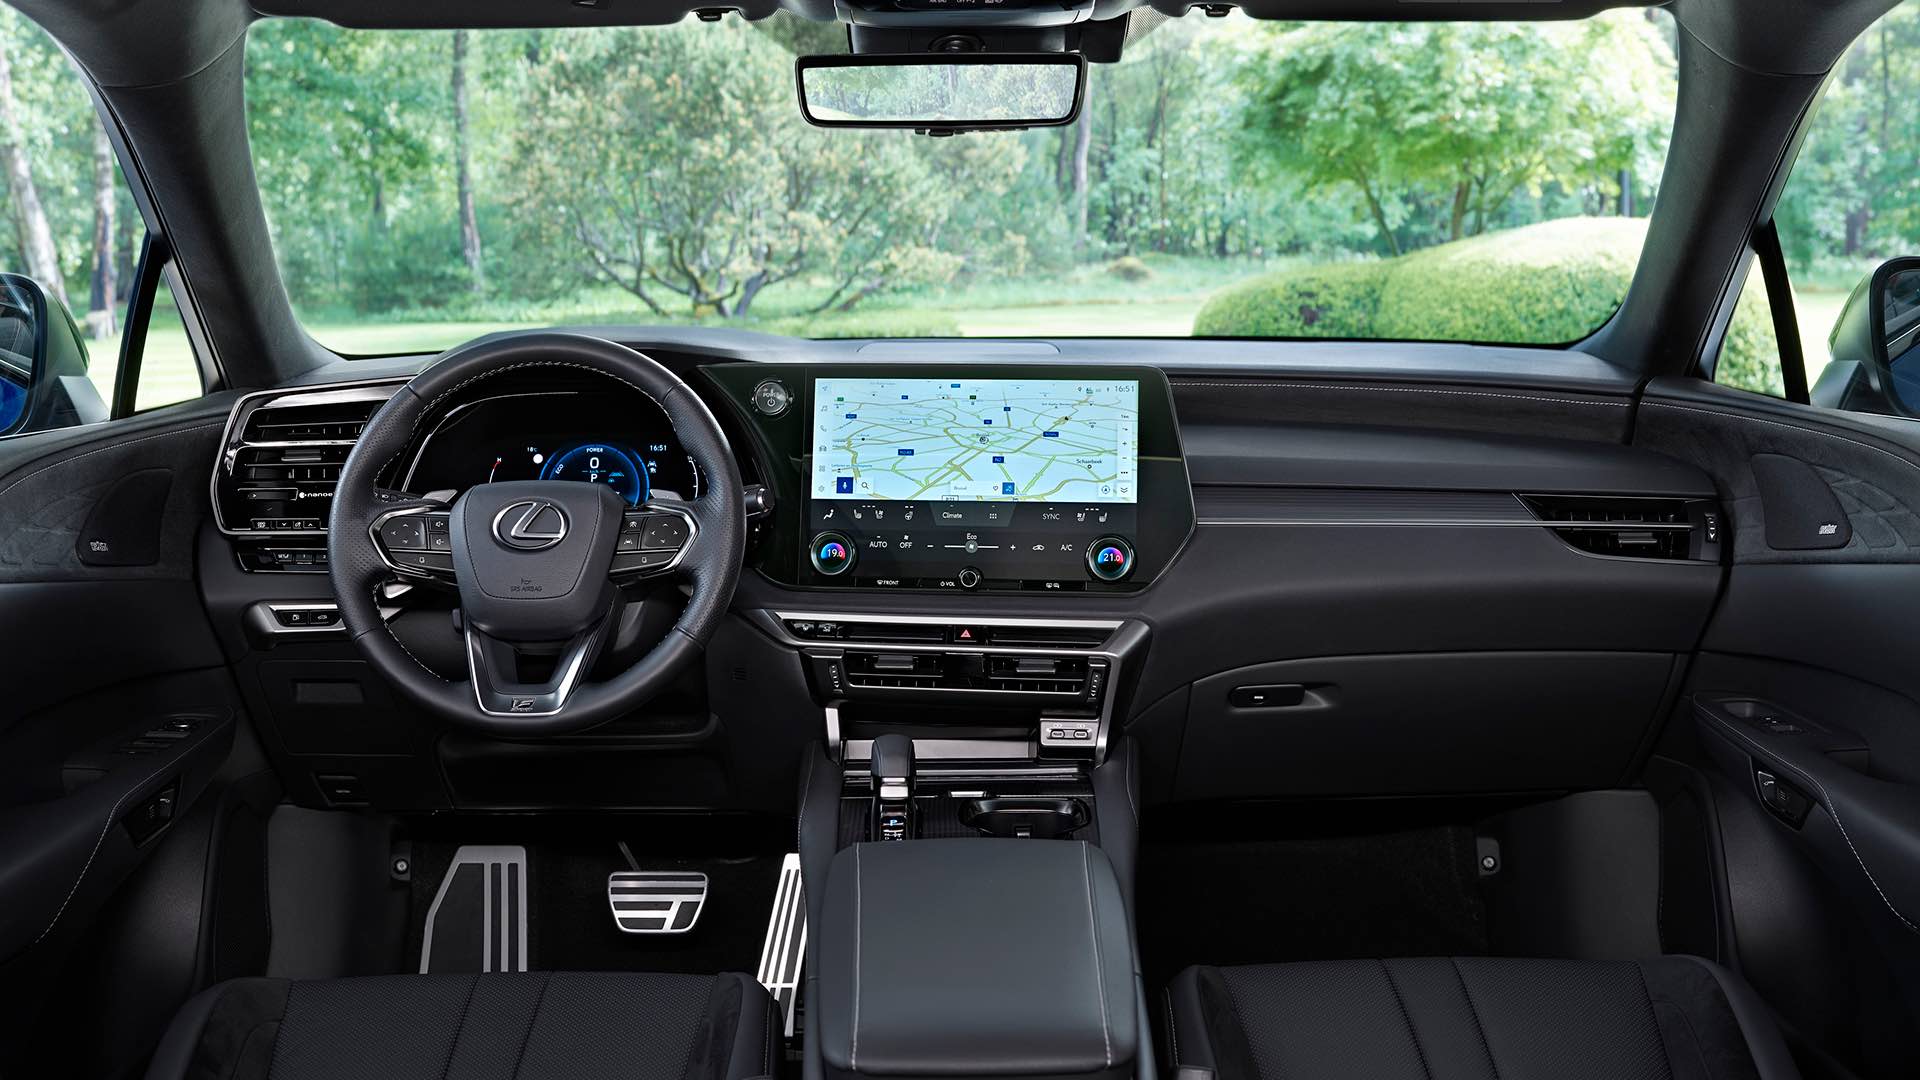 The interior view of a left hand drive Lexus RX. The multimedia screen is lit up with a map. The car is facing out to greenery.